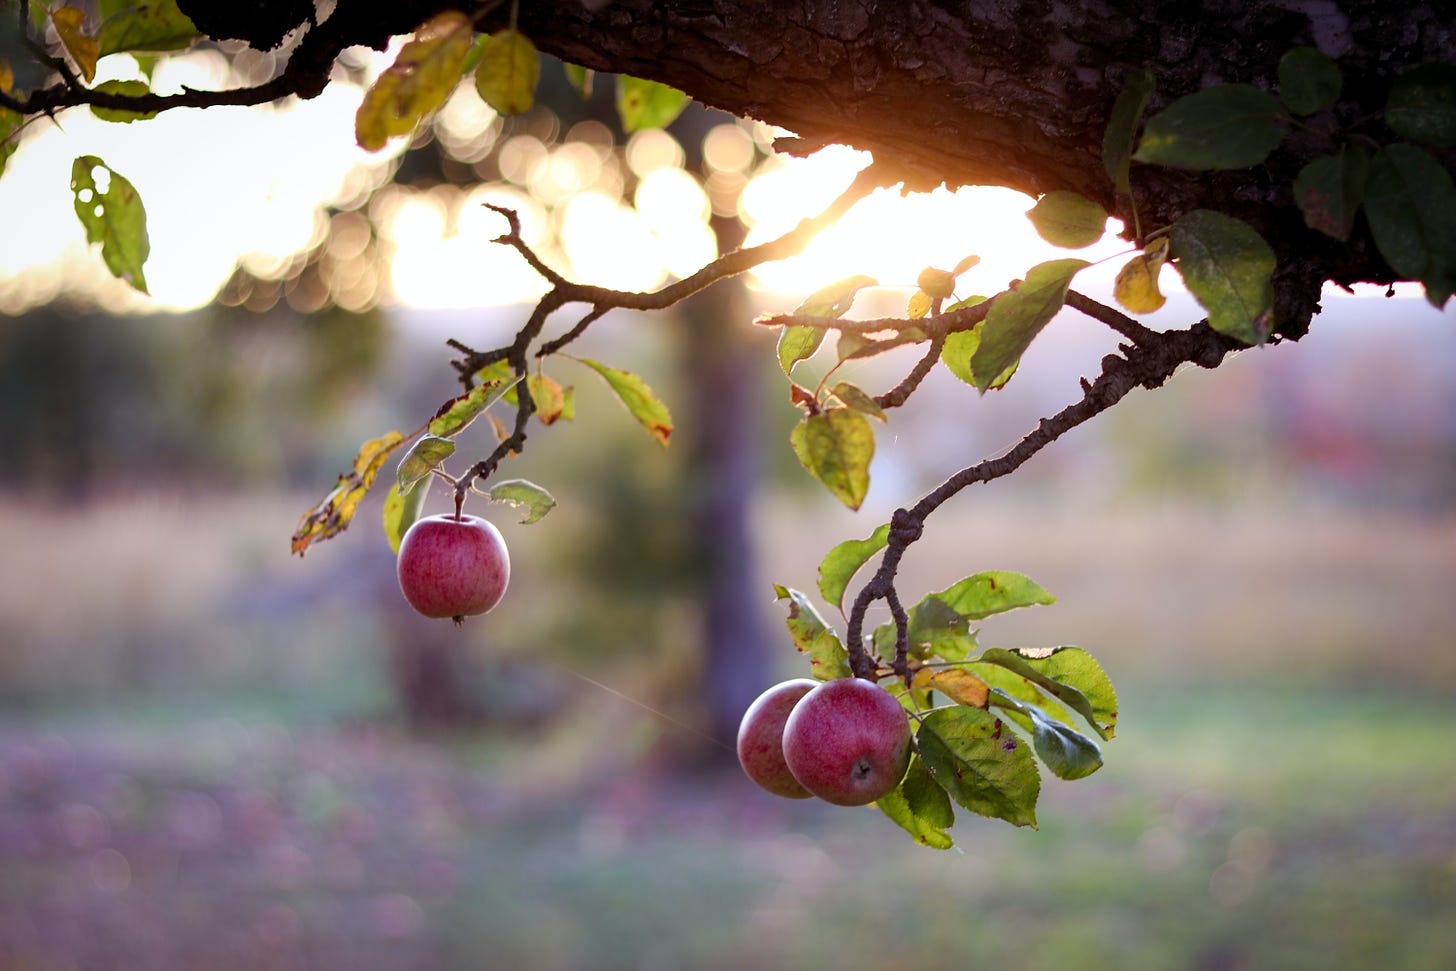 apples hanging from a branch